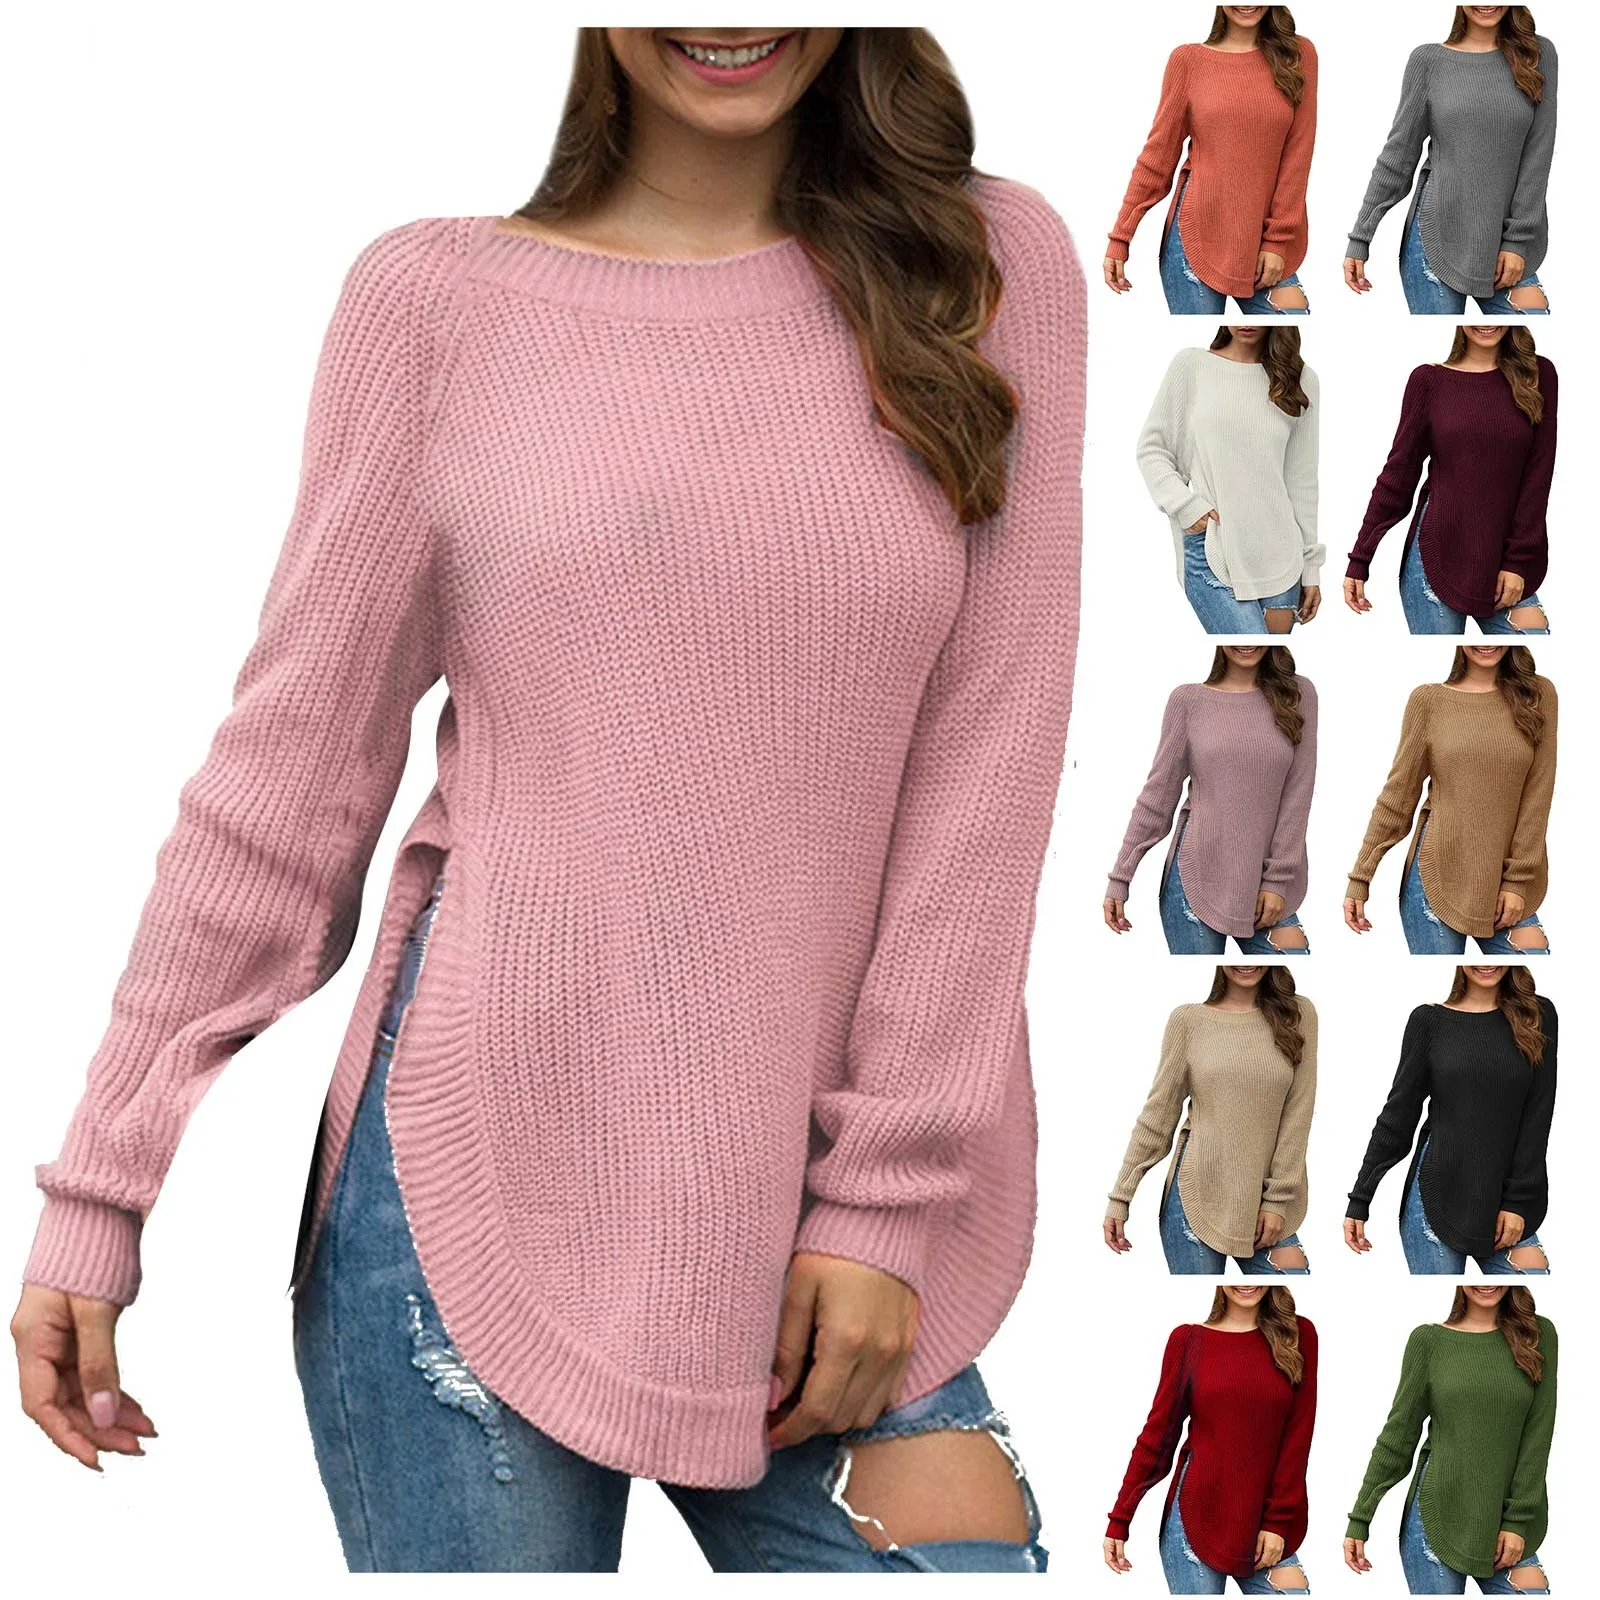 

Women's Fashion Temperament Casual Hem High Slit Round Neck Long Sleeve Jumper Sweater Pullover cardigans for woman 2023